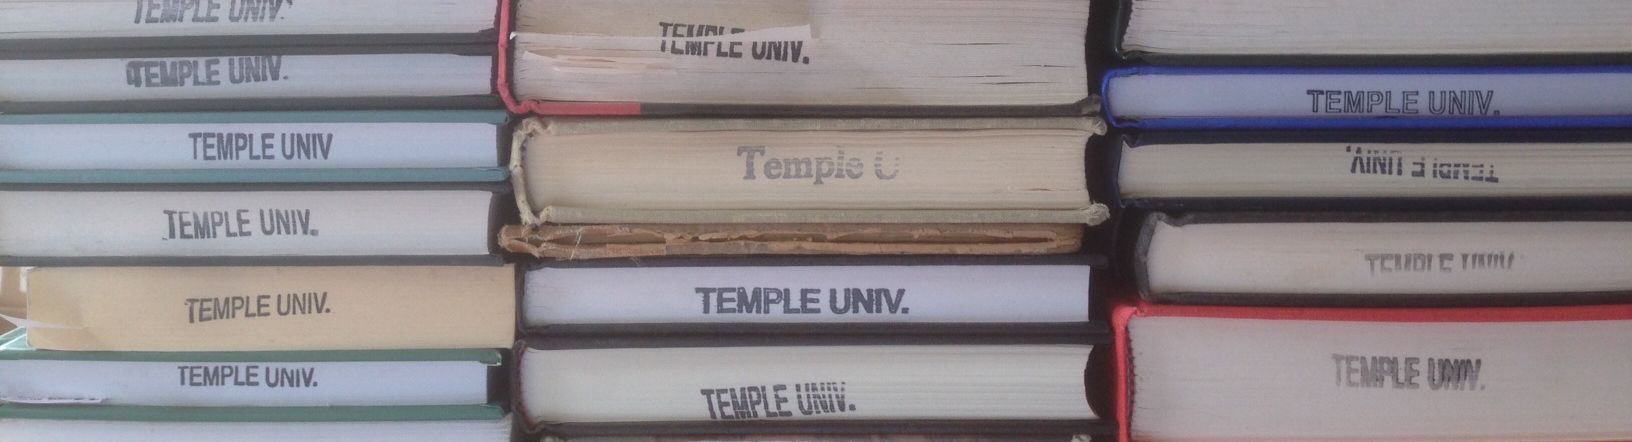 Three stacks of books, each stamped with the words "Temple University."